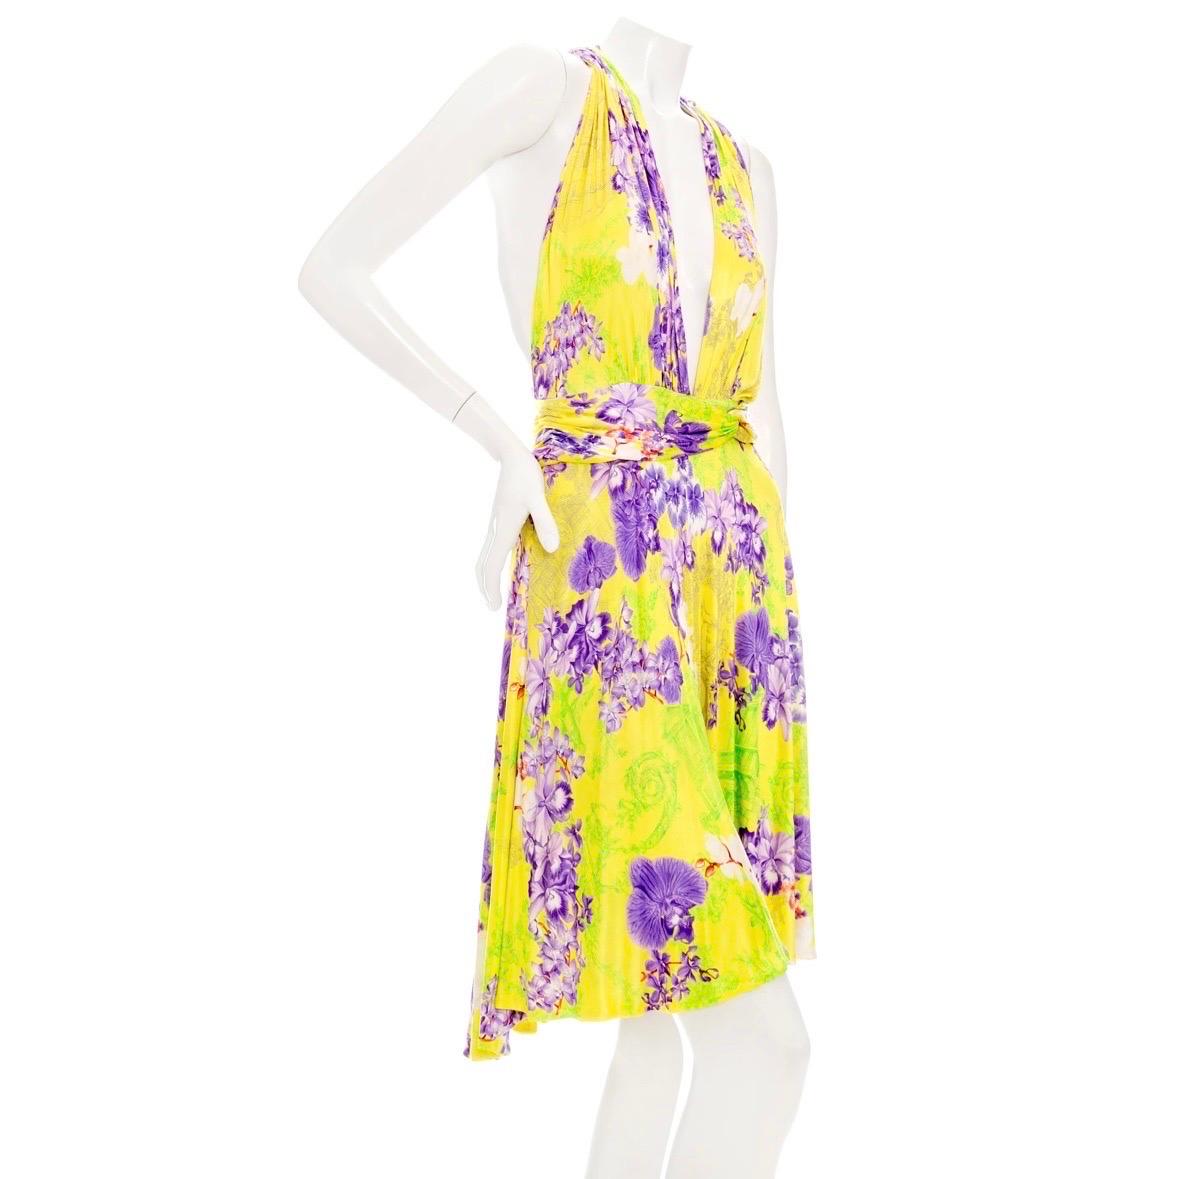 Versace 2004 Yellow Slinky Floral-Print Halter Dress
Spring 2004 Ready-To-Wear
Yellow/Purple
Floral print on French-inspired background print
Sleeveless
Deep V-neckline
Halter strap
Infinity loop belt front detail
Invisible back zip closure